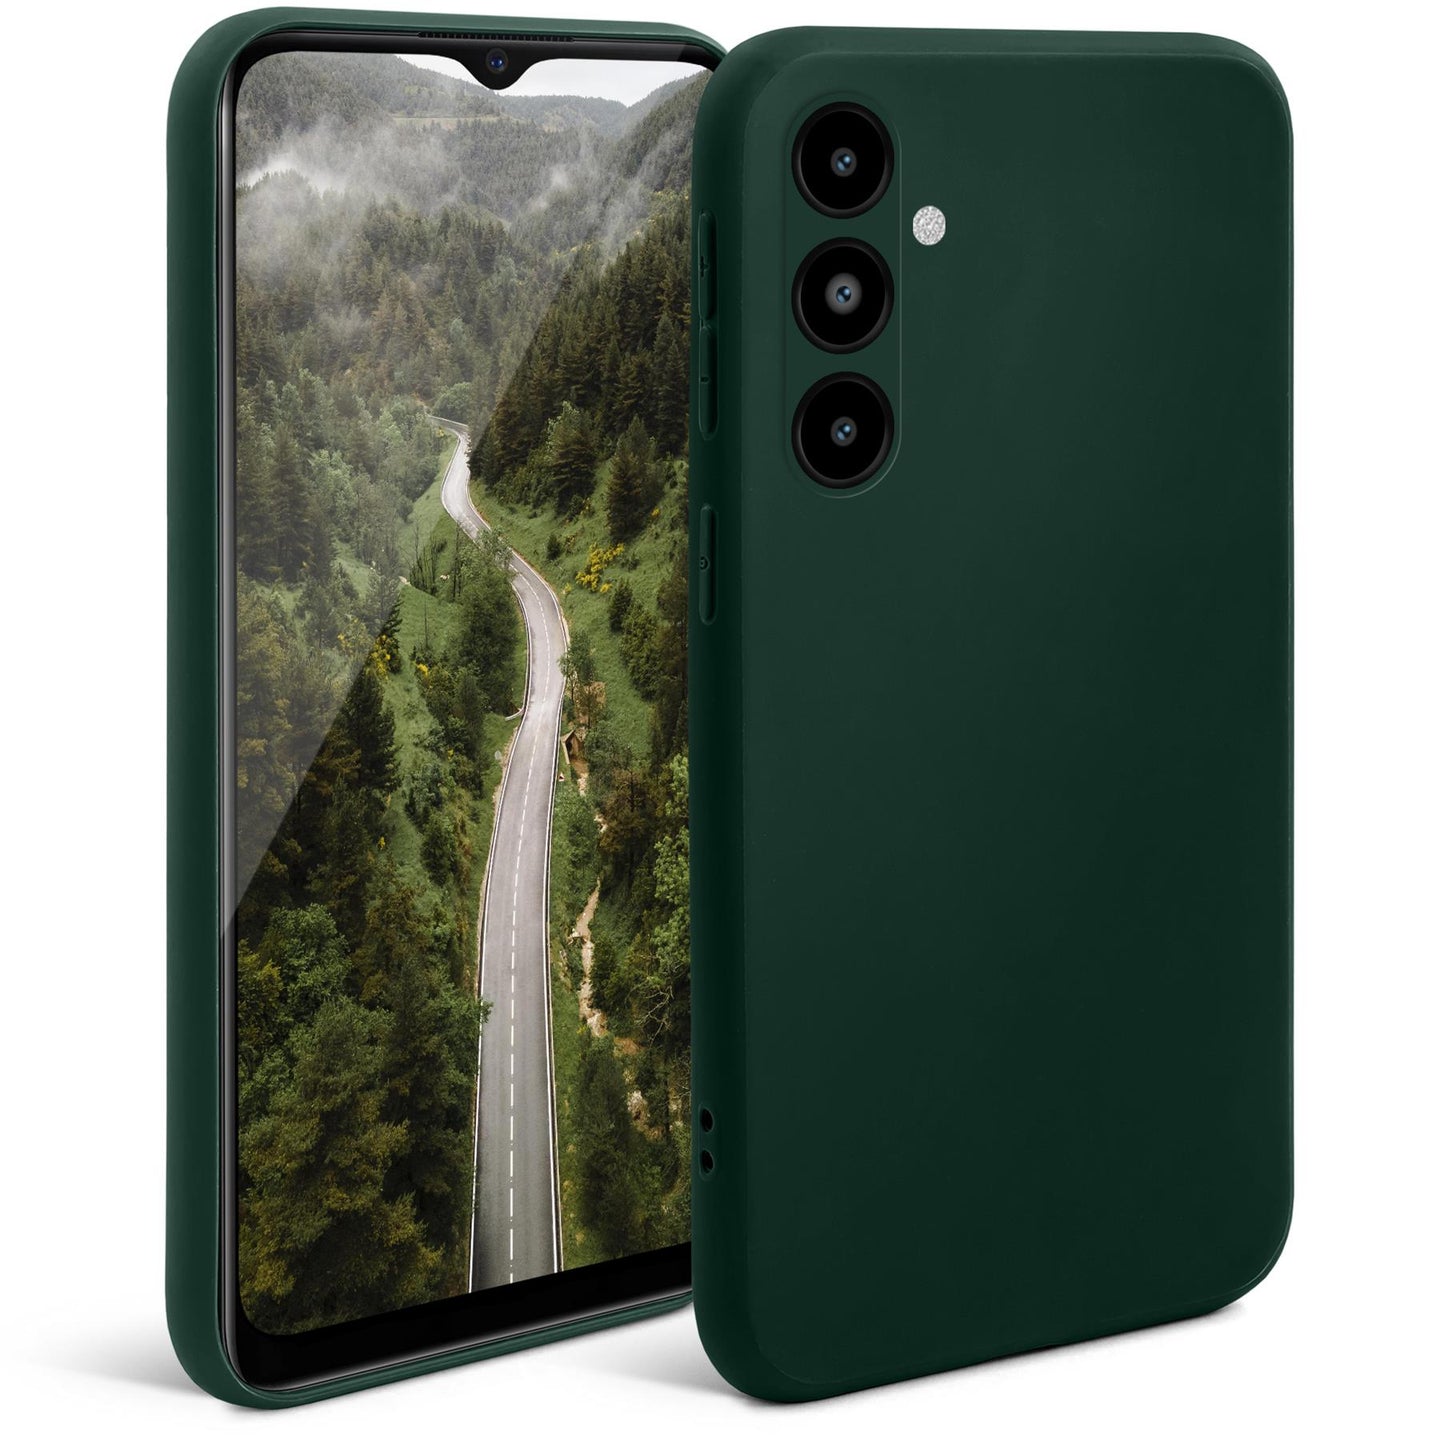 Moozy Minimalist Series Silicone Case for Samsung A14, Midnight Green - Matte Finish Lightweight Mobile Phone Case Slim Soft Protective TPU Cover with Matte Surface